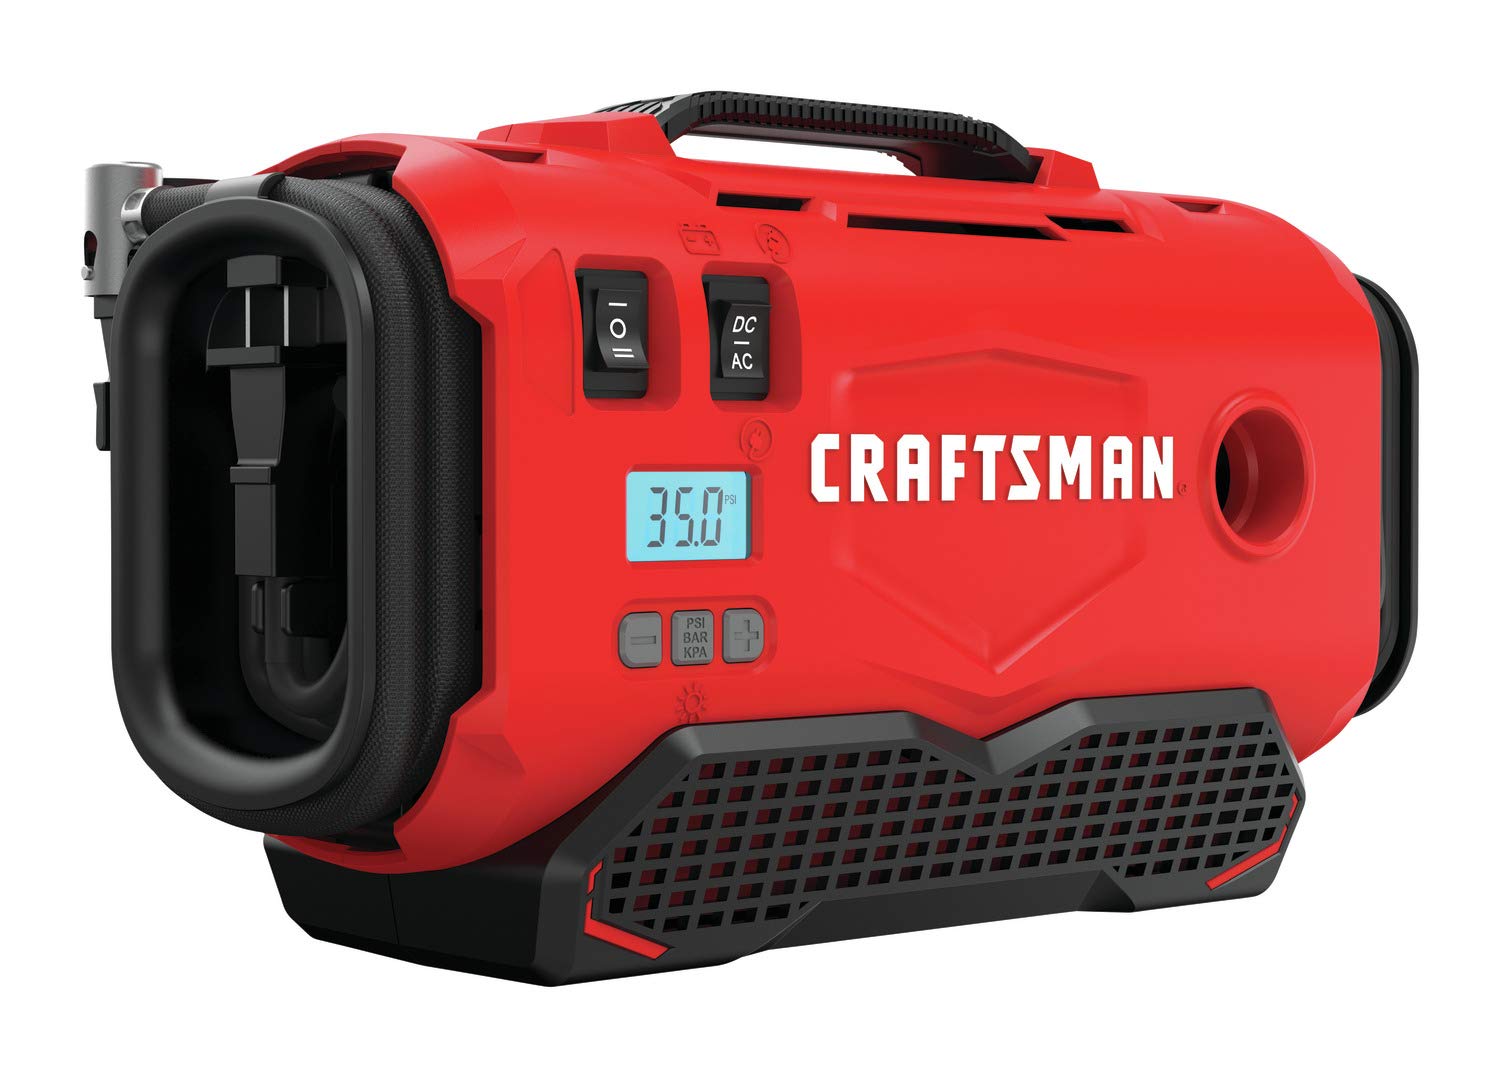 Craftsman V20 Tire Inflator, Compact and Portable, Automatic Shut Off, Digital PSI Gauge, Bare Tool Only (CMCE520B), Red